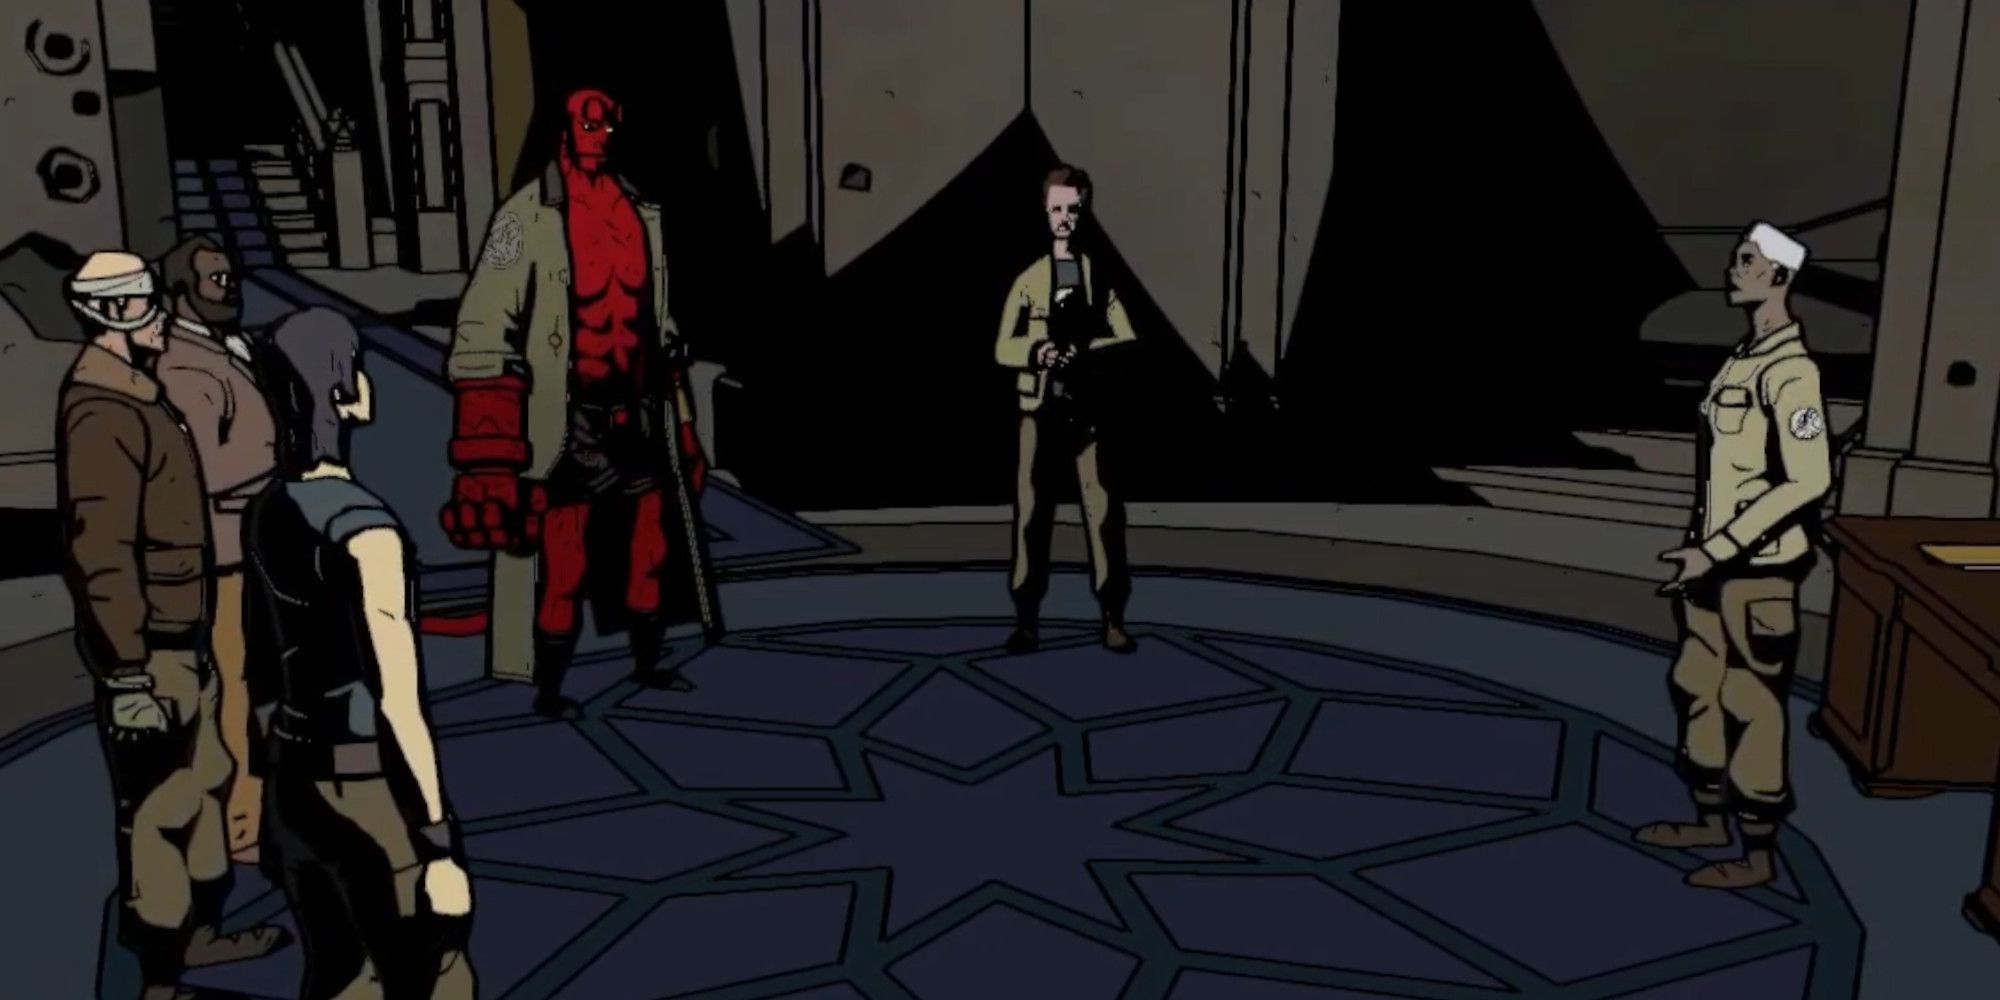 A gameplay screenshot showing Hellboy with other five characters standing in the middle of a circular room.